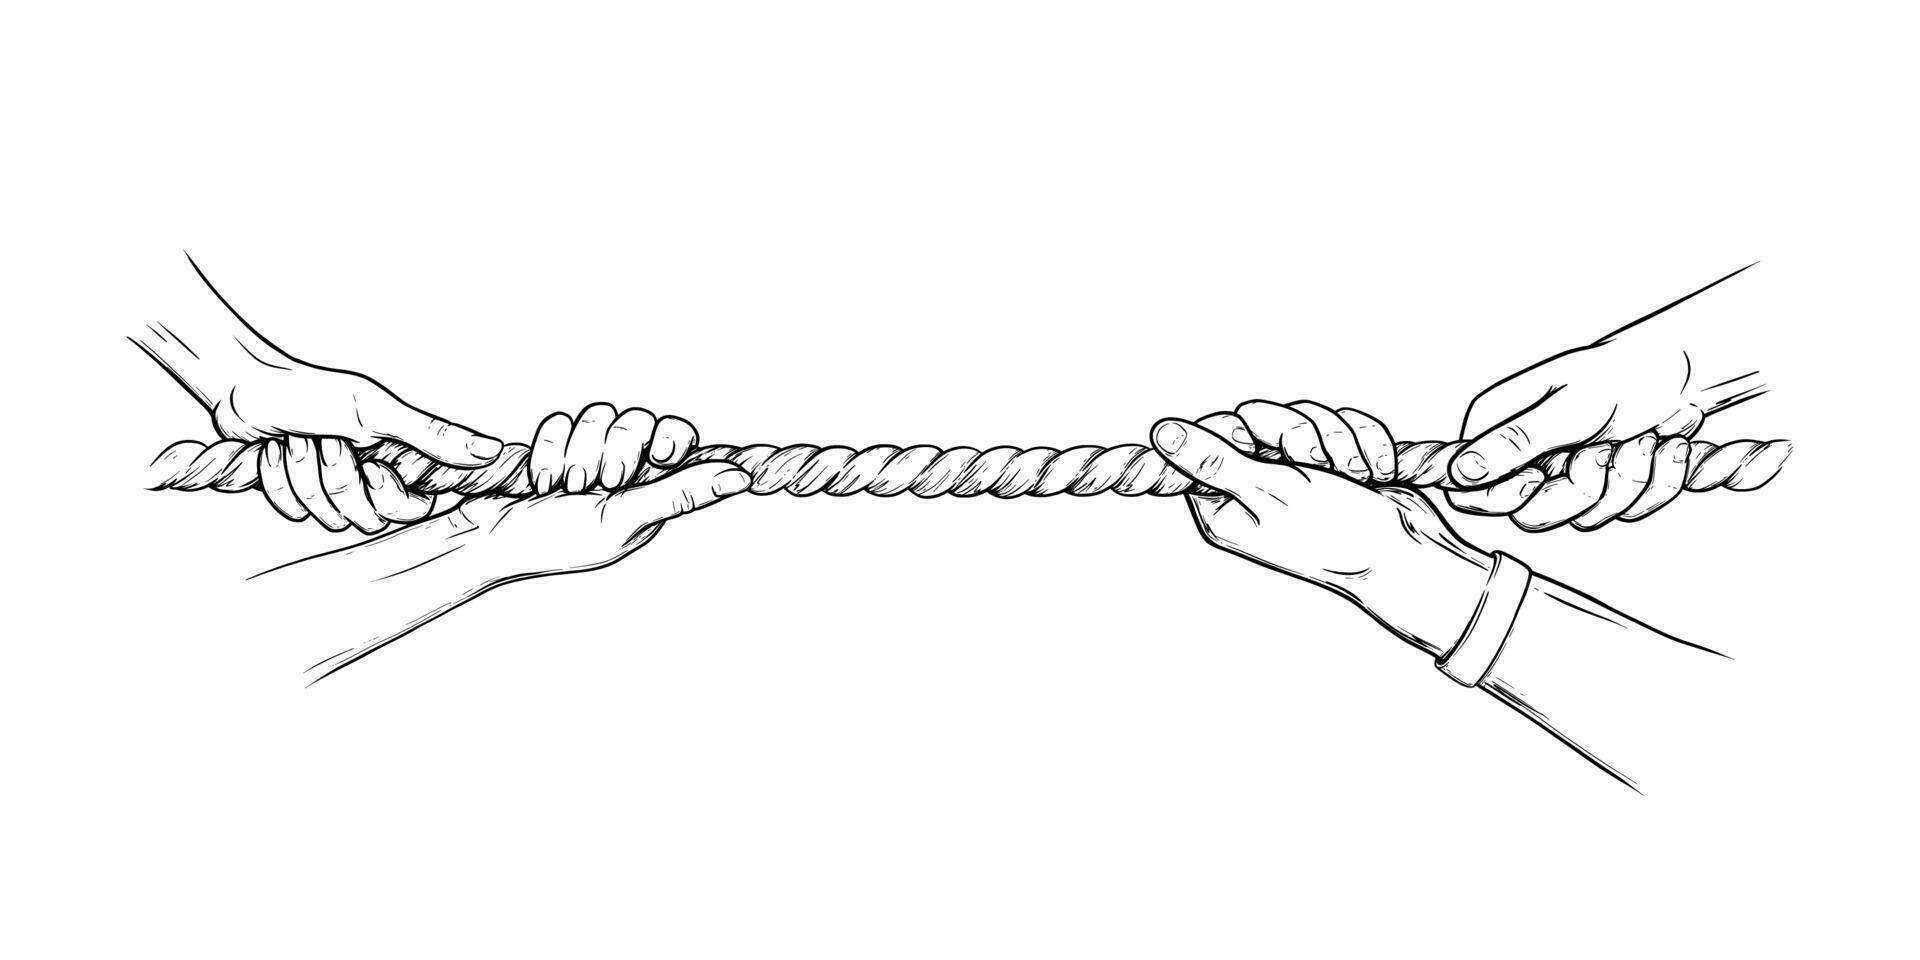 Tug war competition with rope. Hands pulling rope. Sketch hand drawn vector illustration